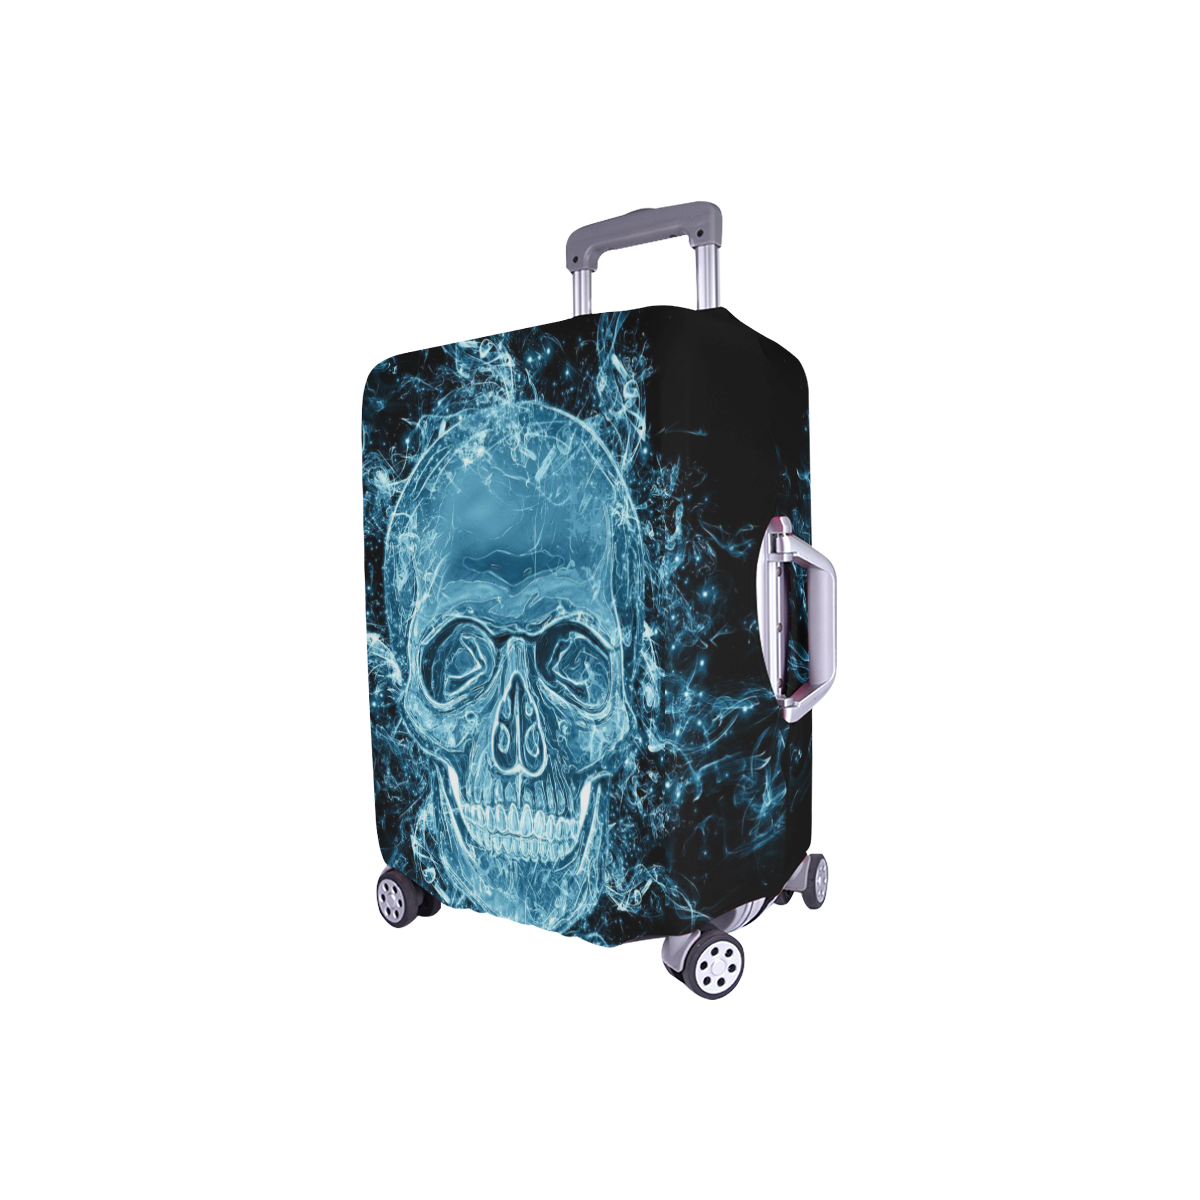 glowing skull Luggage Cover/Small 18"-21"